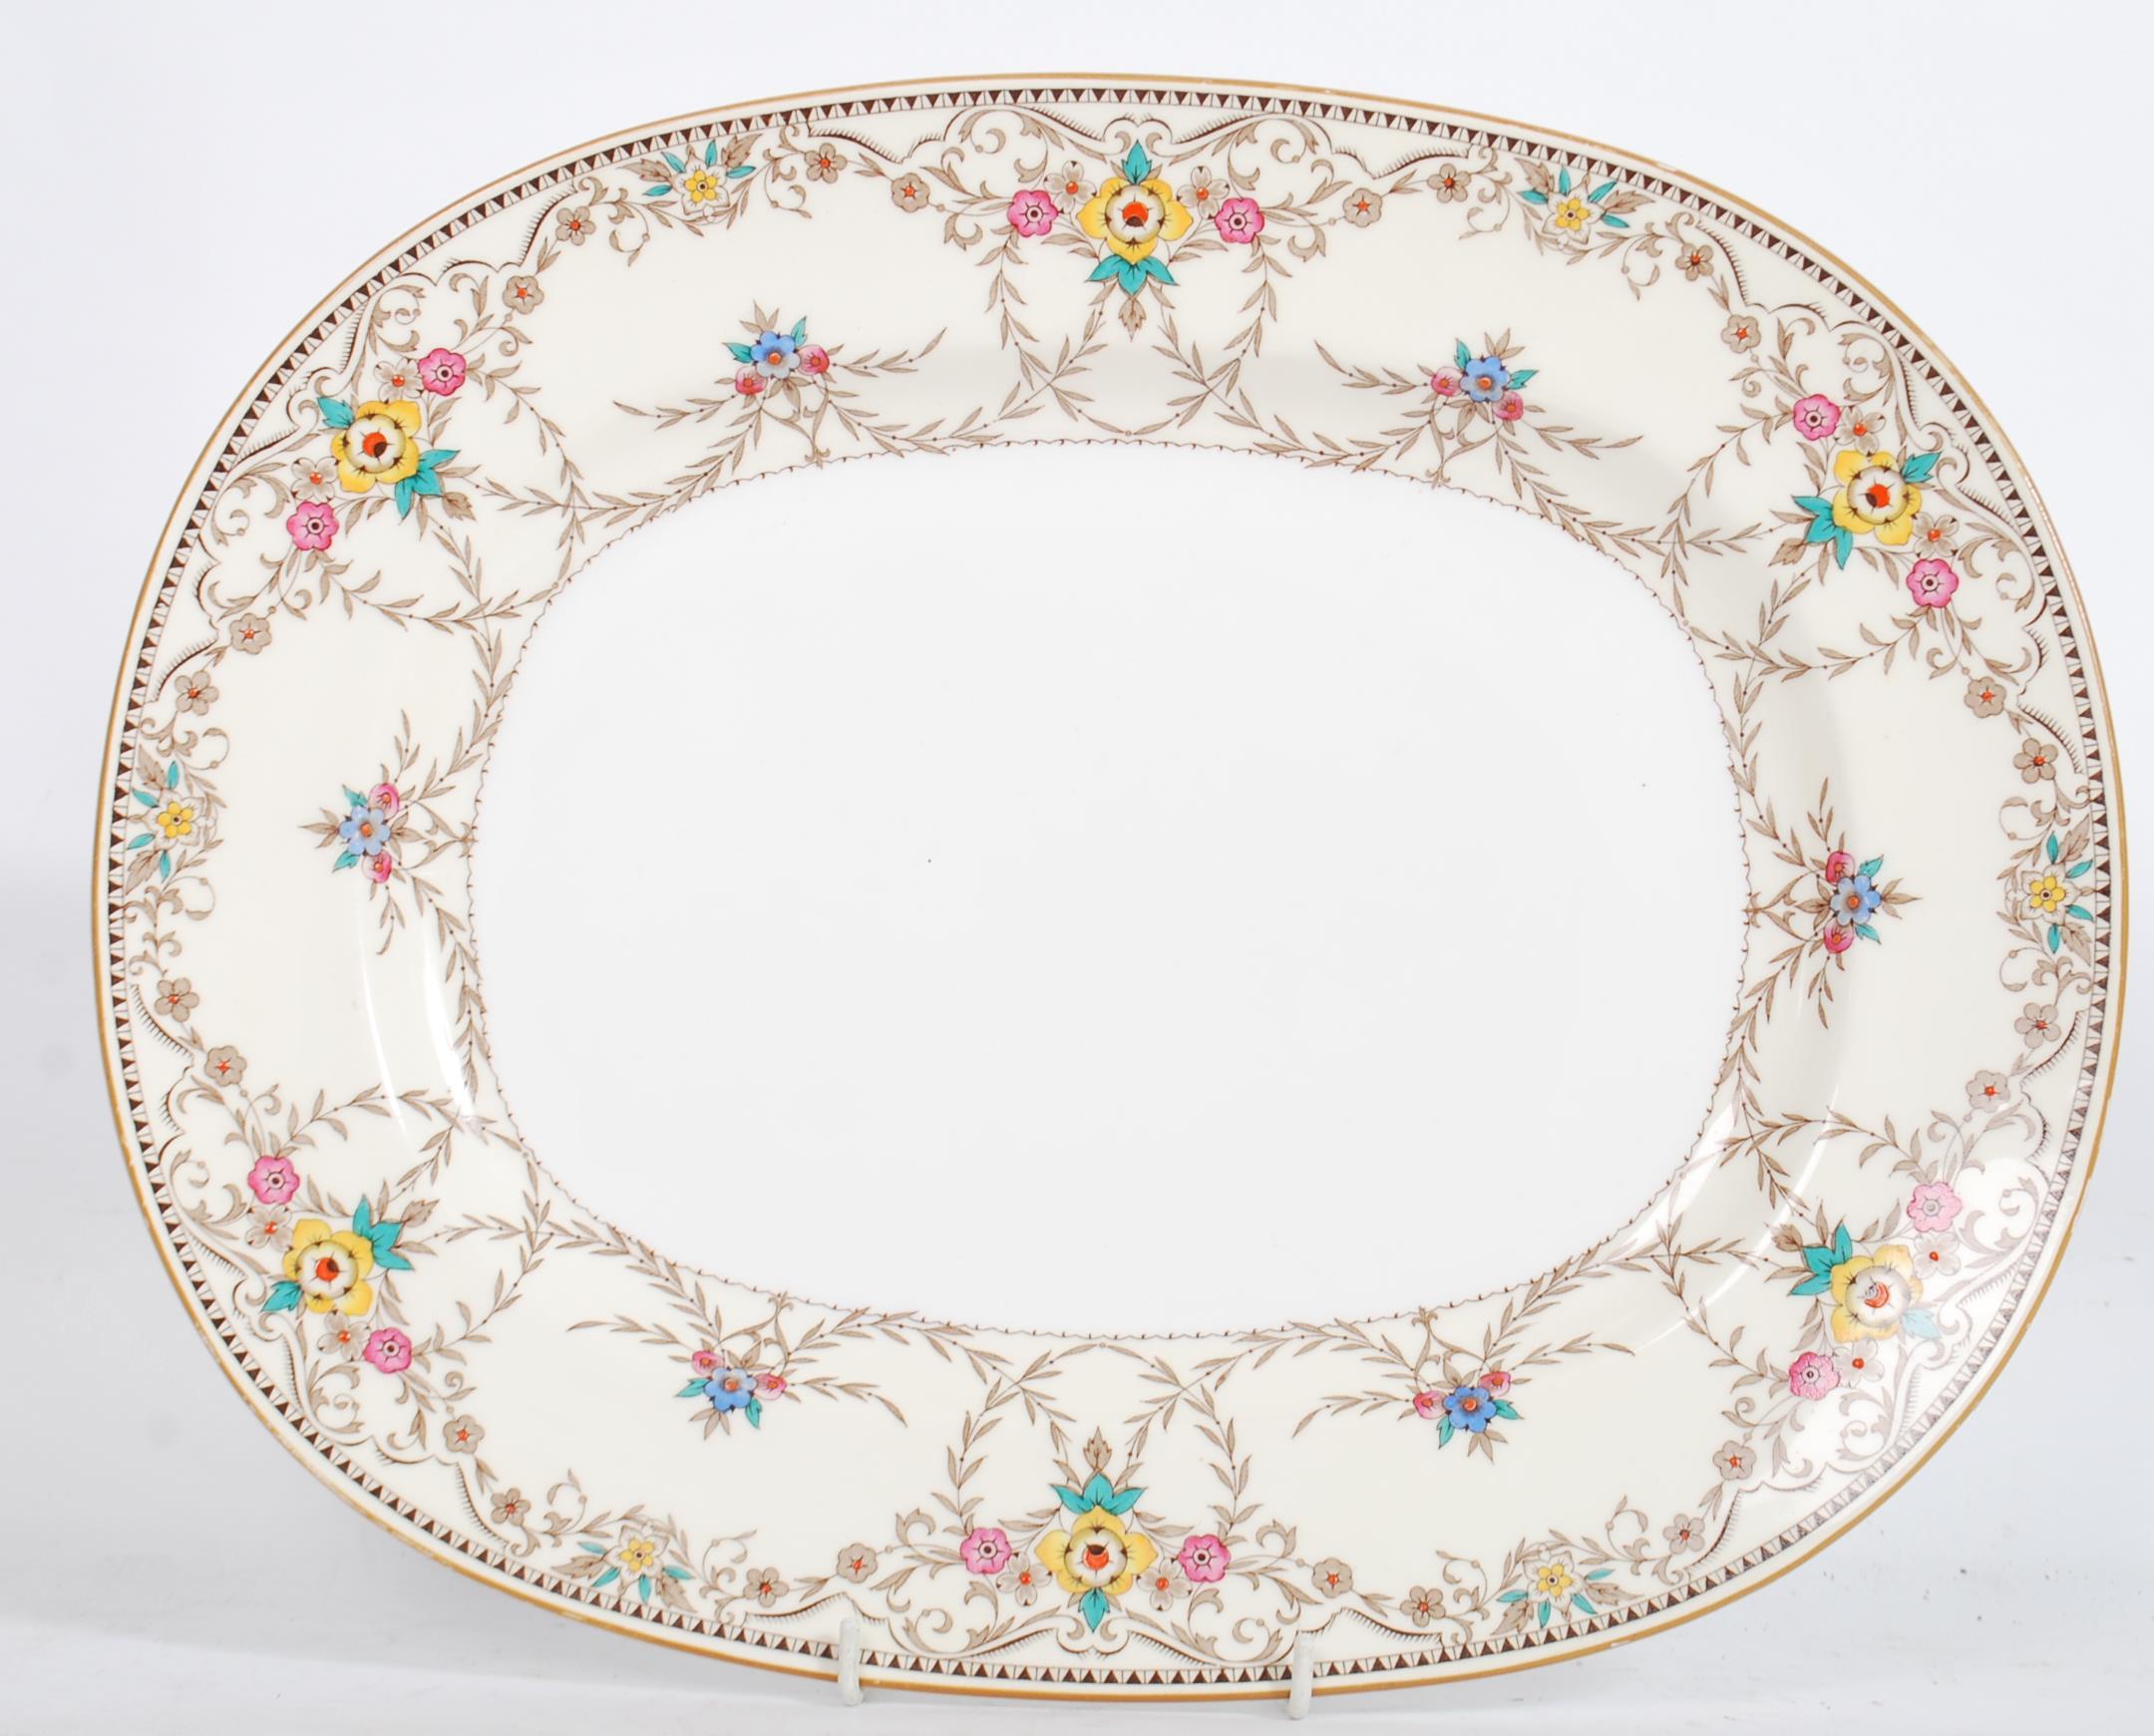 An early 20th century Minton's ( Minton) hand painted and transfer printed meat platter tray in